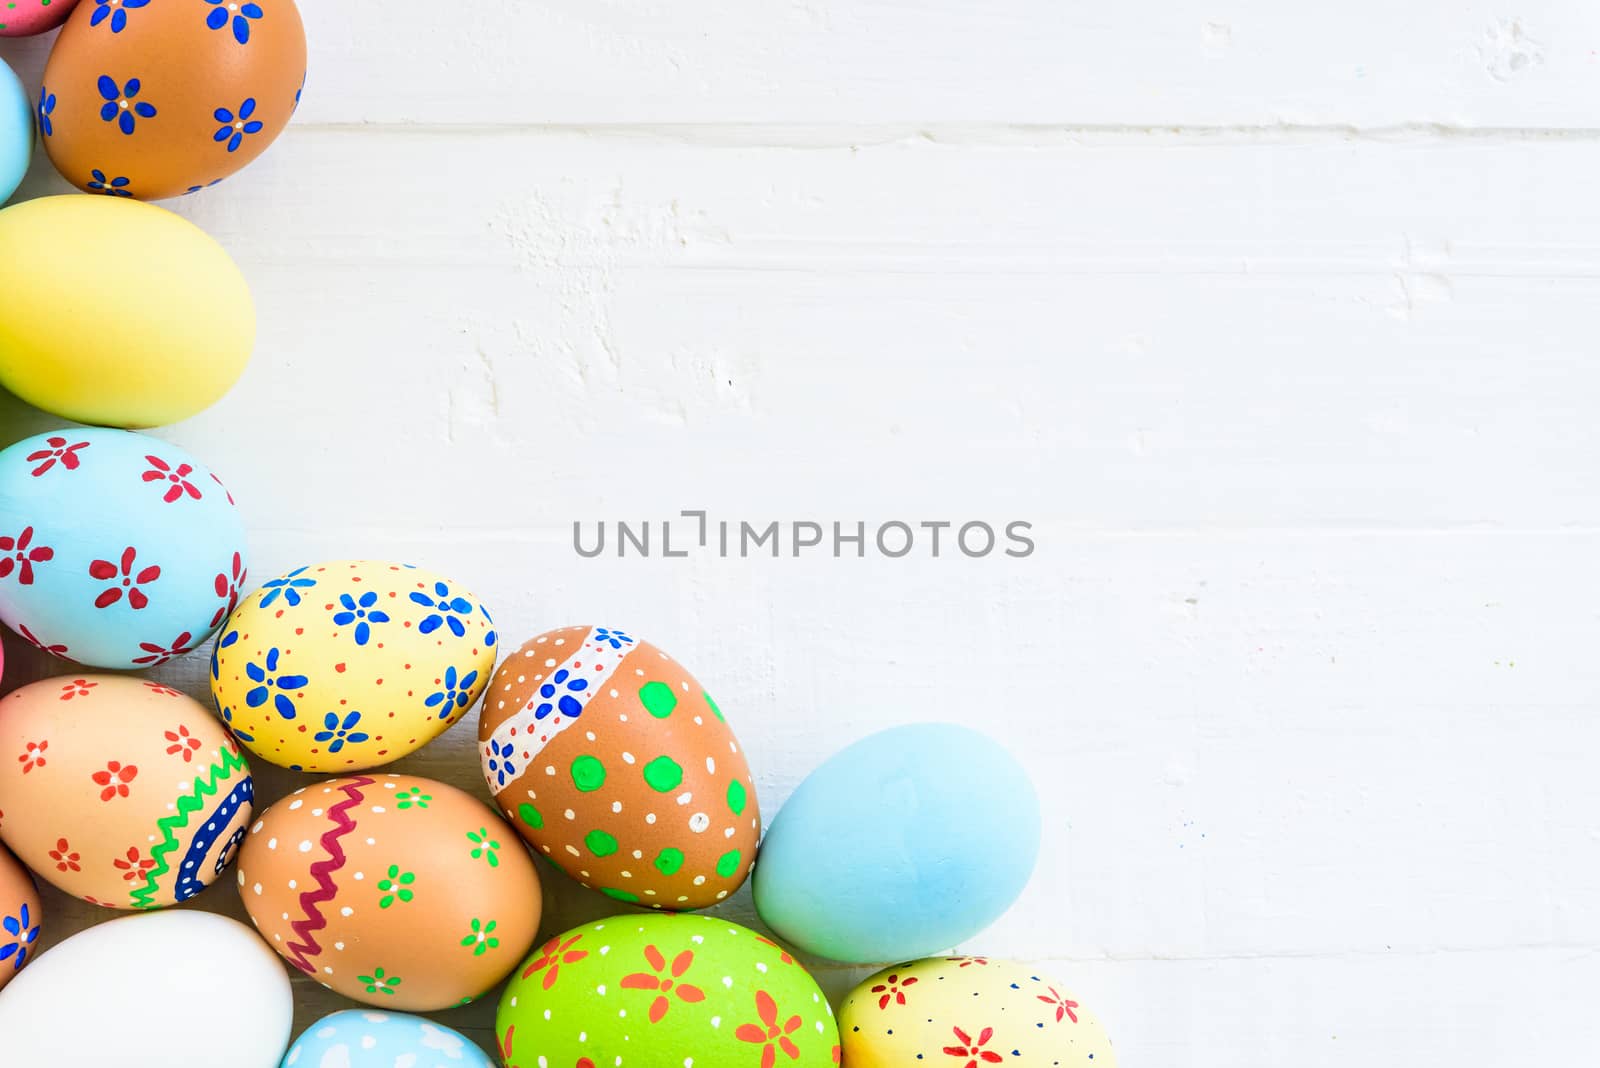 Happy easter! Row Colorful Easter eggs with colorful paper flowe by spukkato